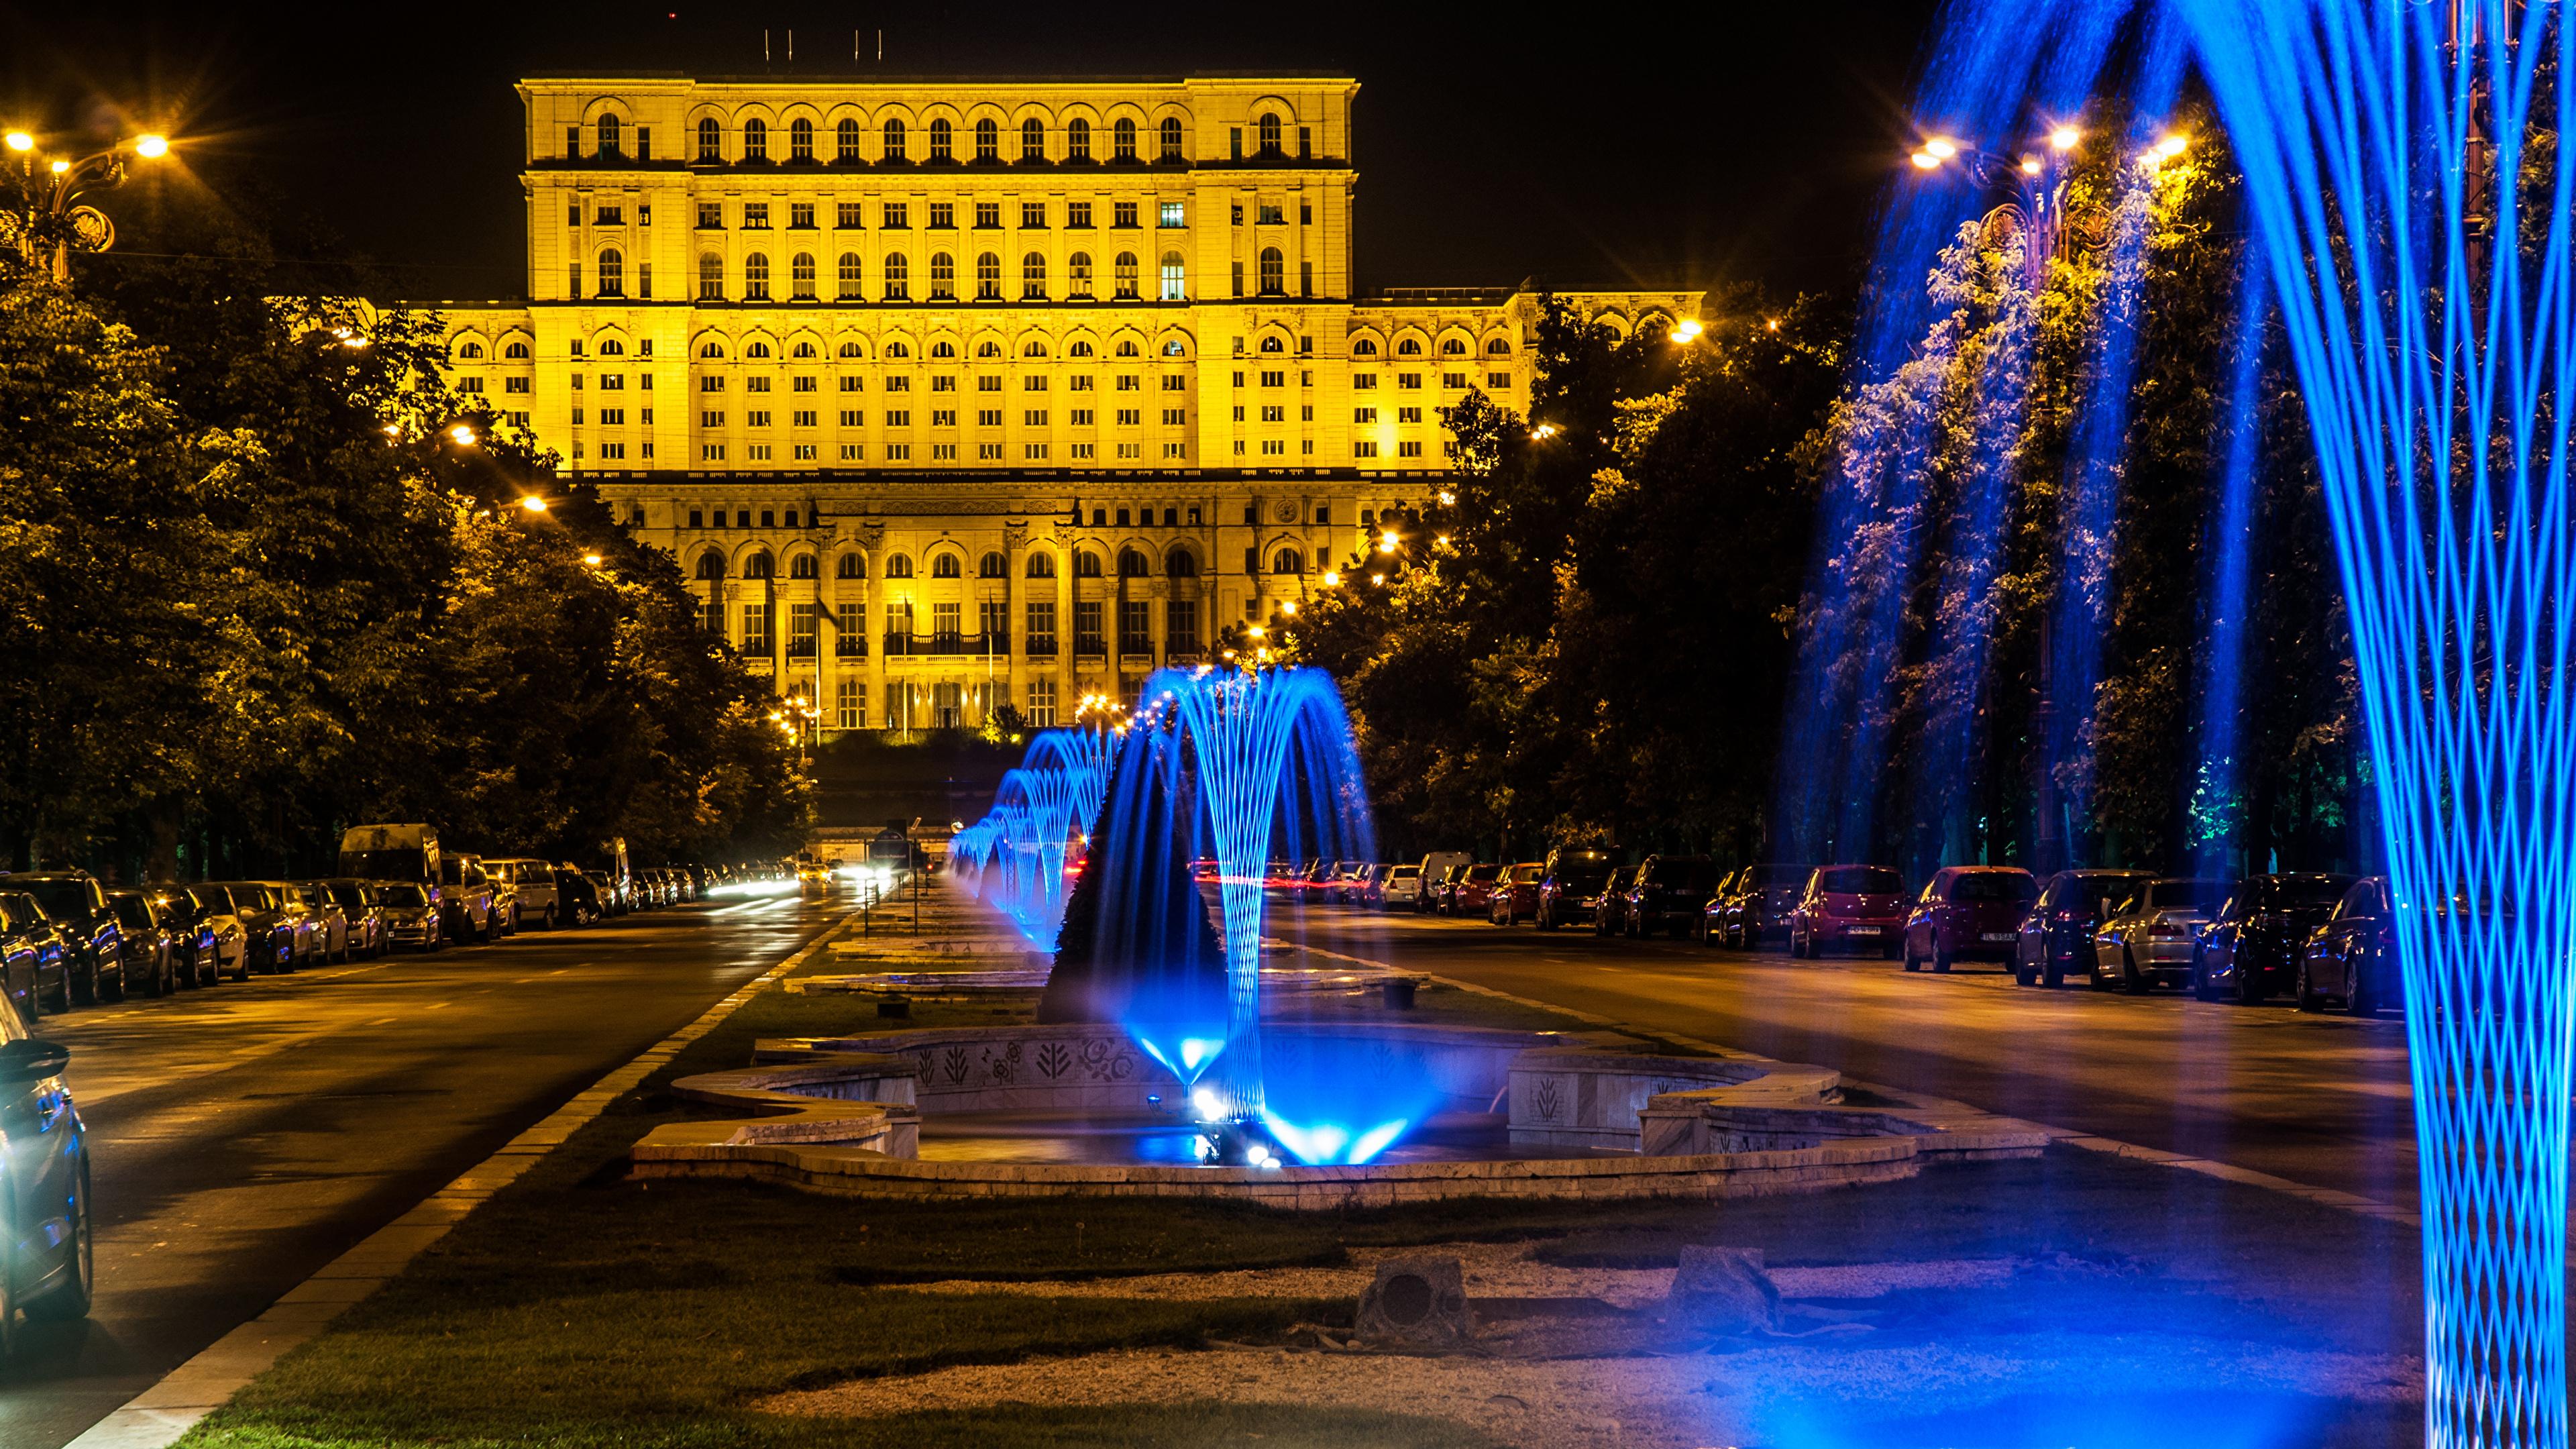 Image Romania Fountains Bucharest night time Cities Houses 3840x2160